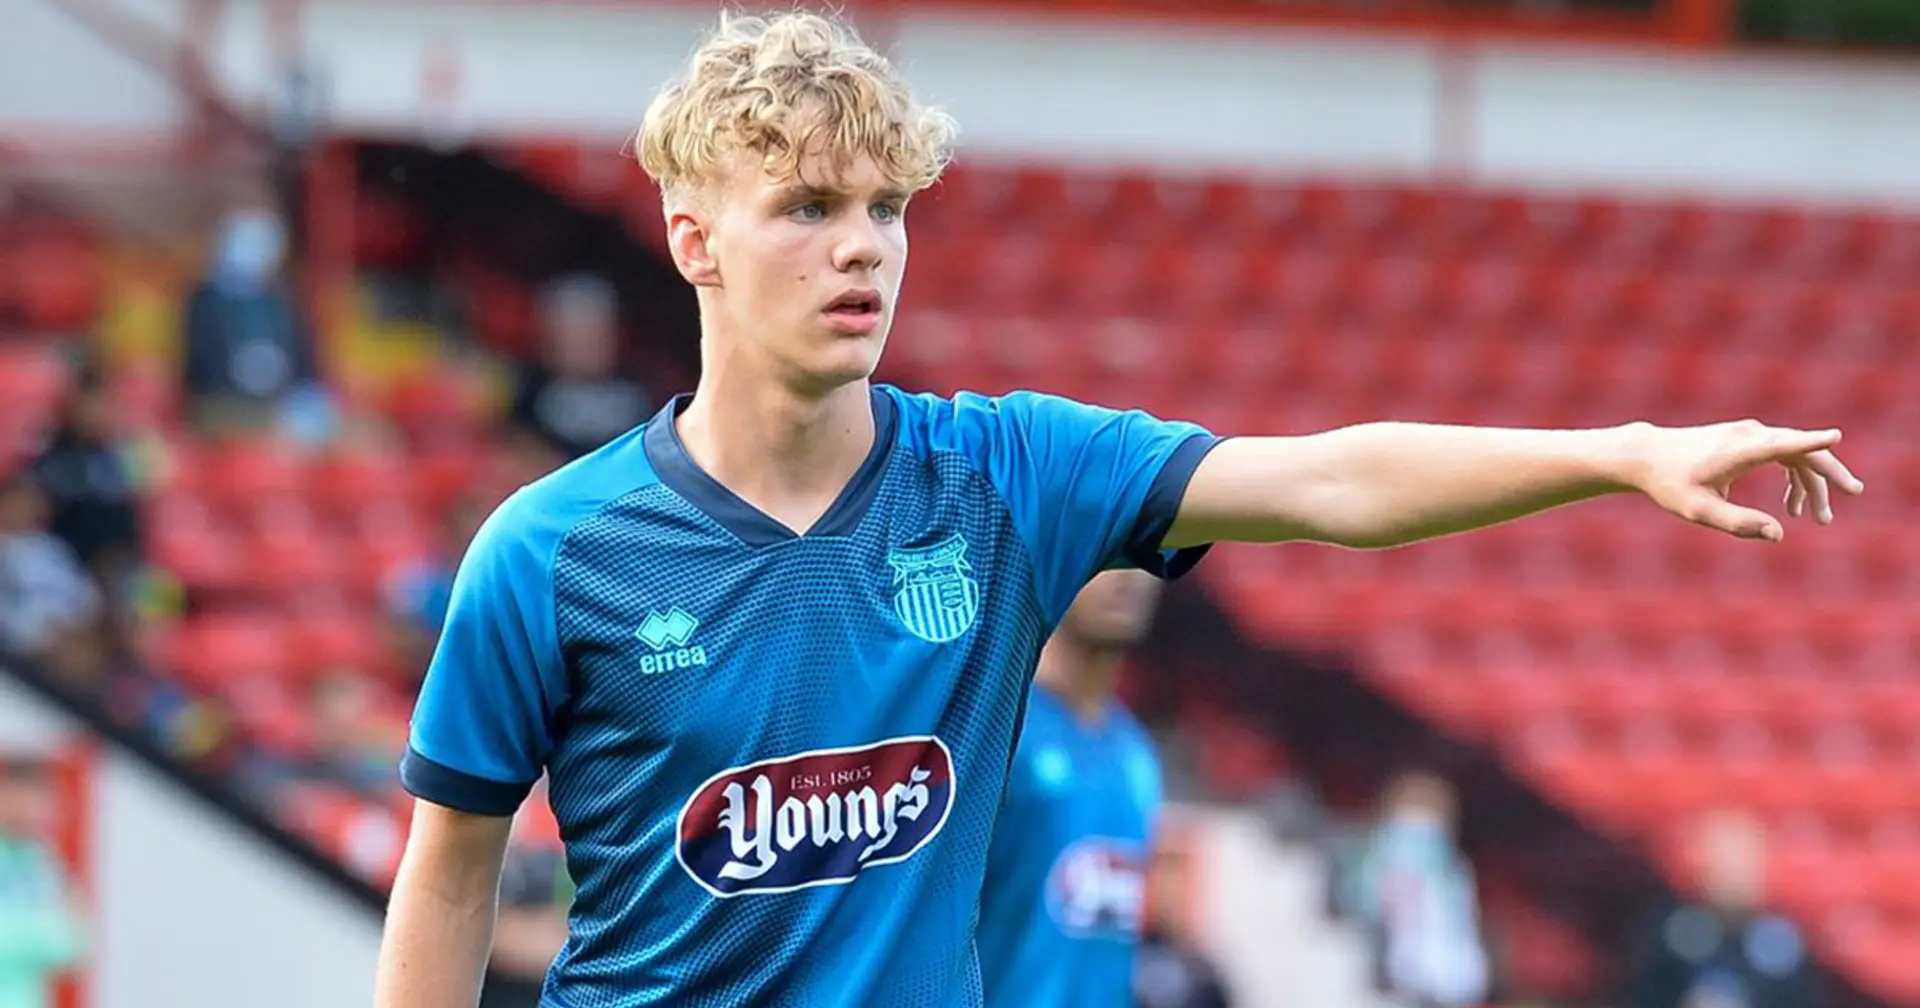 The Athletic: Liverpool interested in 2 League Two starlets - both have made senior debuts as 15-year-olds (reliability: 5 stars)